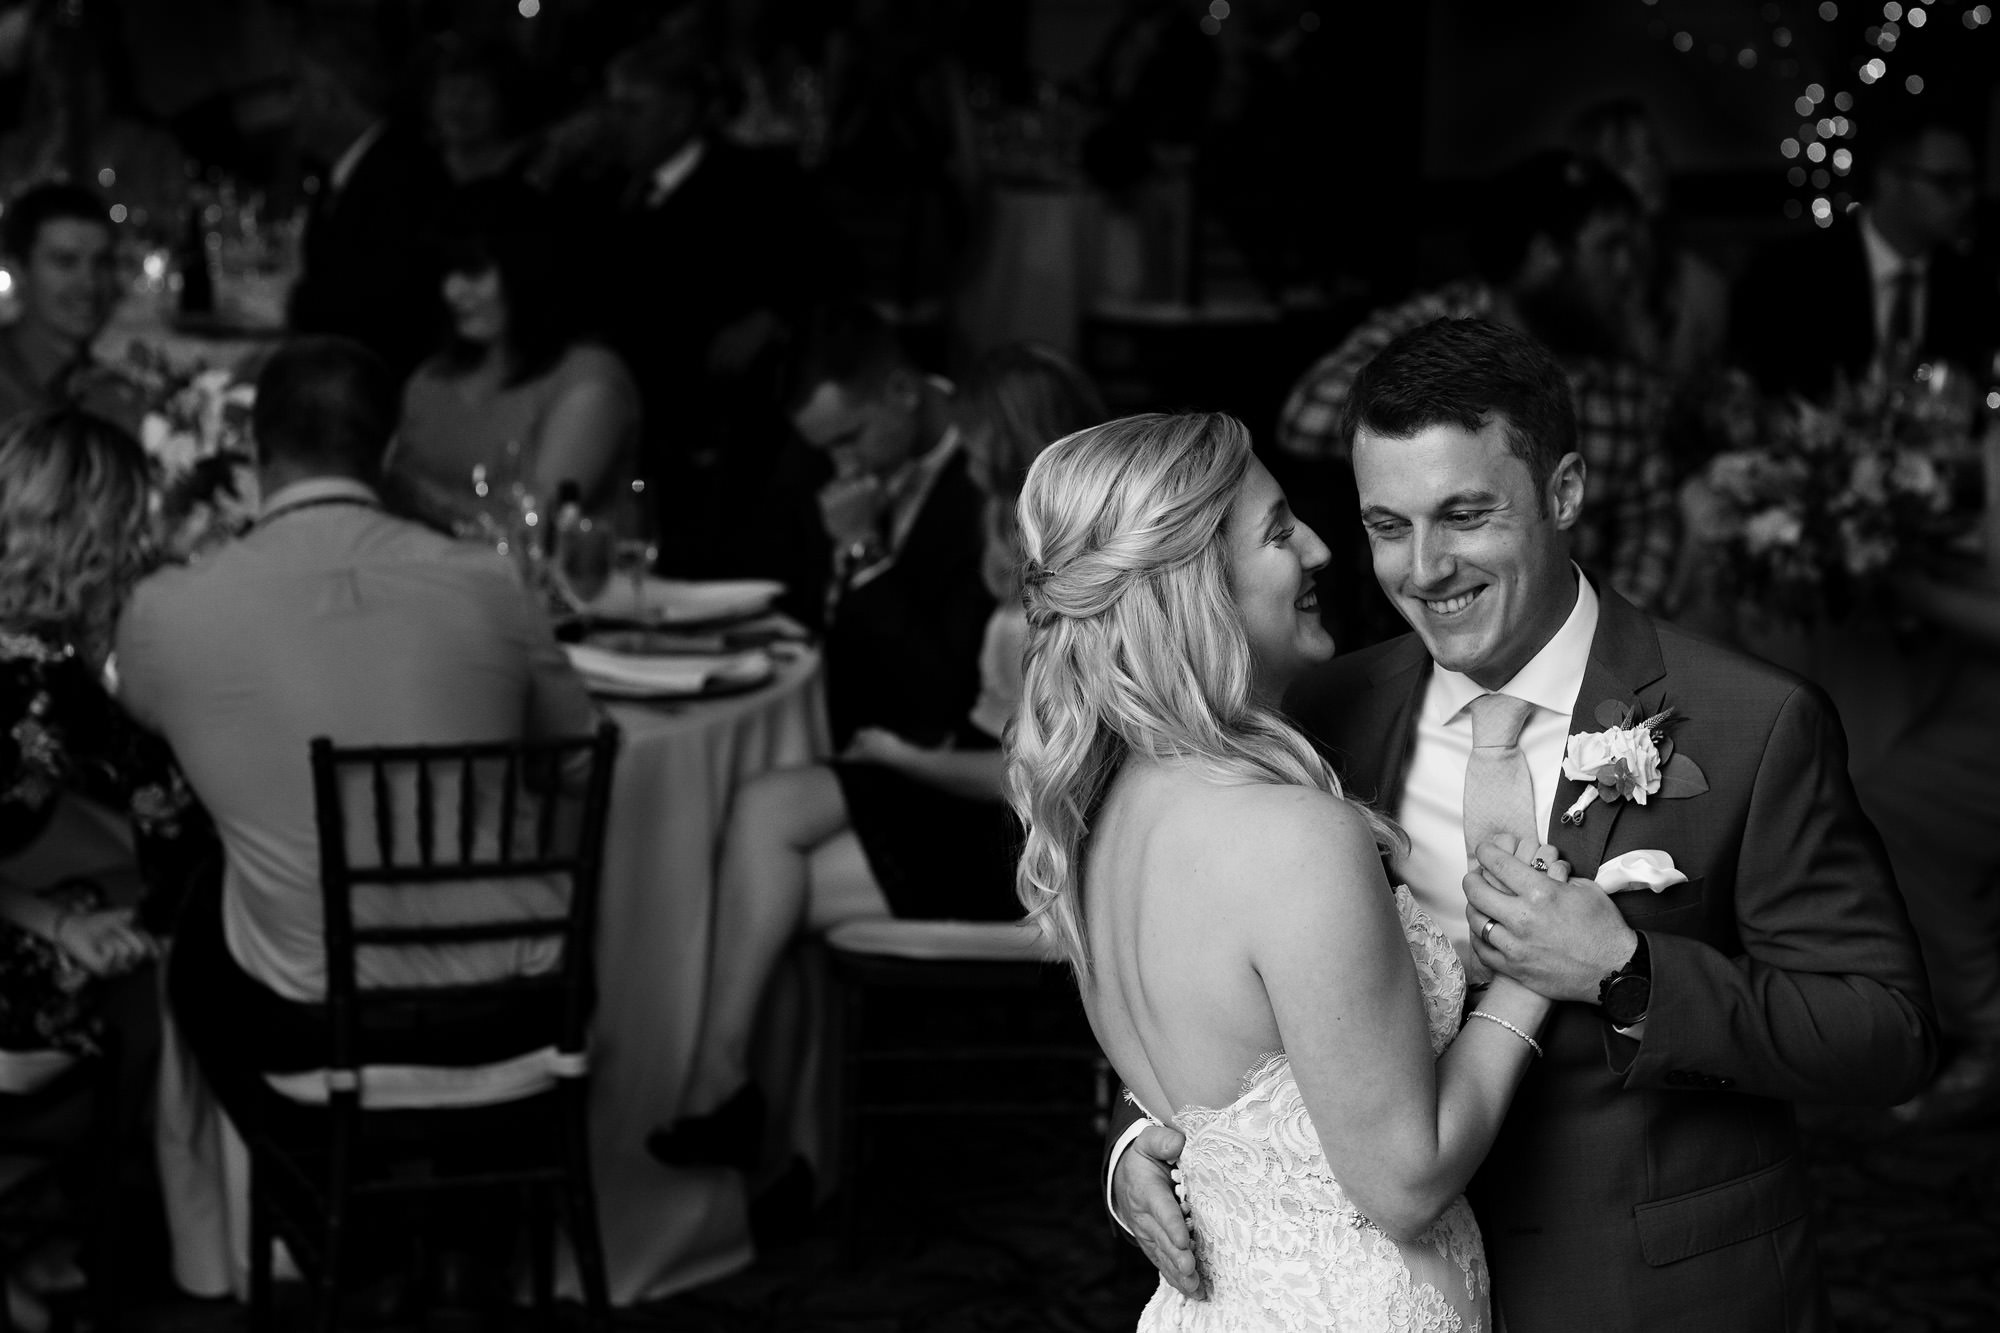 The bride and groom share a romantic first dance in the Bar Harbor Club ballroom.